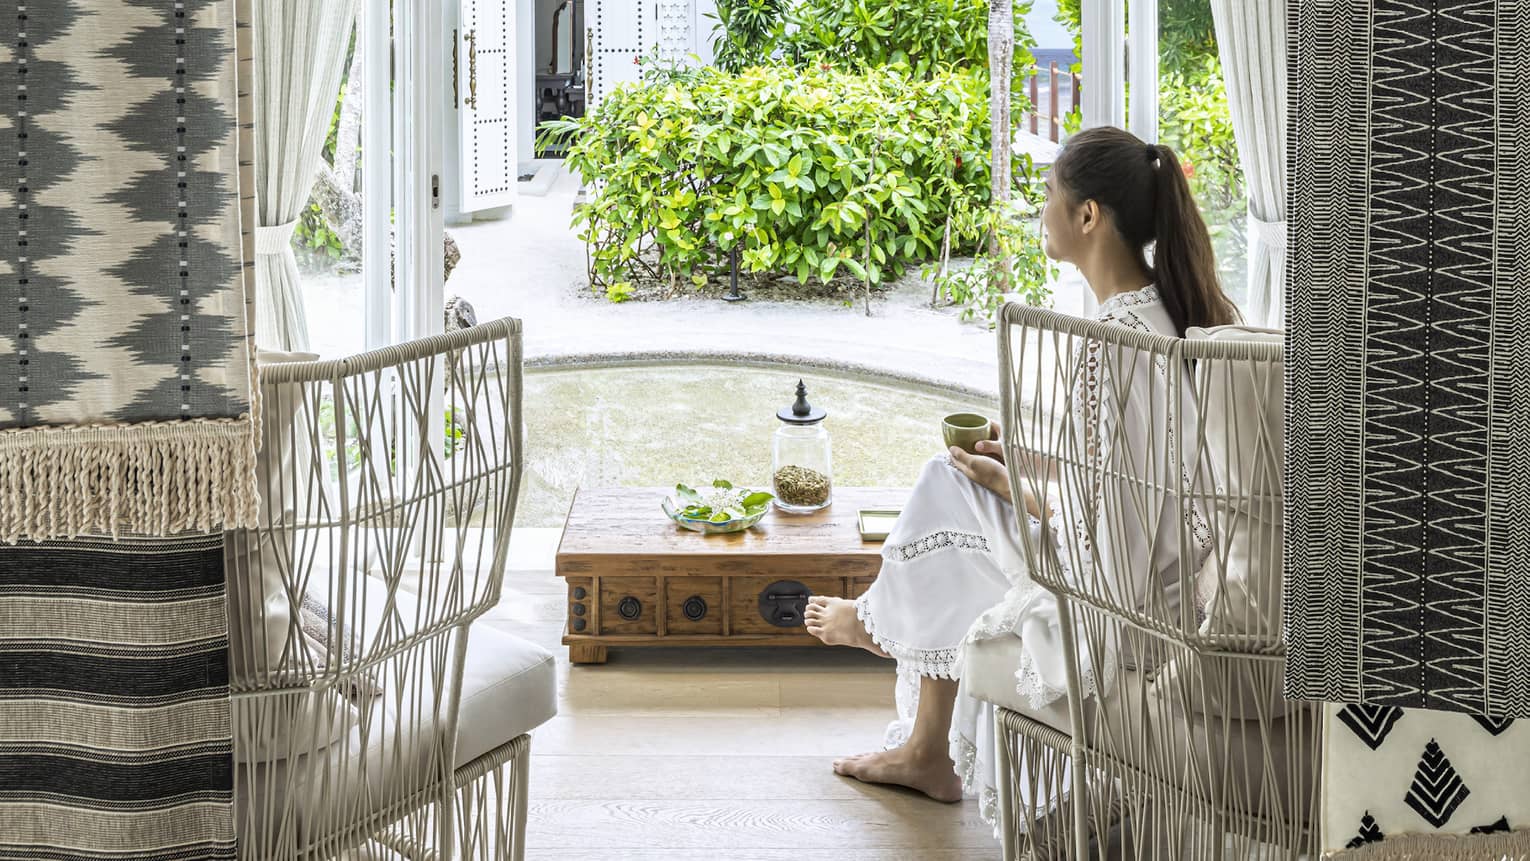 A woman sits in white wicker chair in the four seasons maldives spa waiting area and overlooks the garden outside an opened window